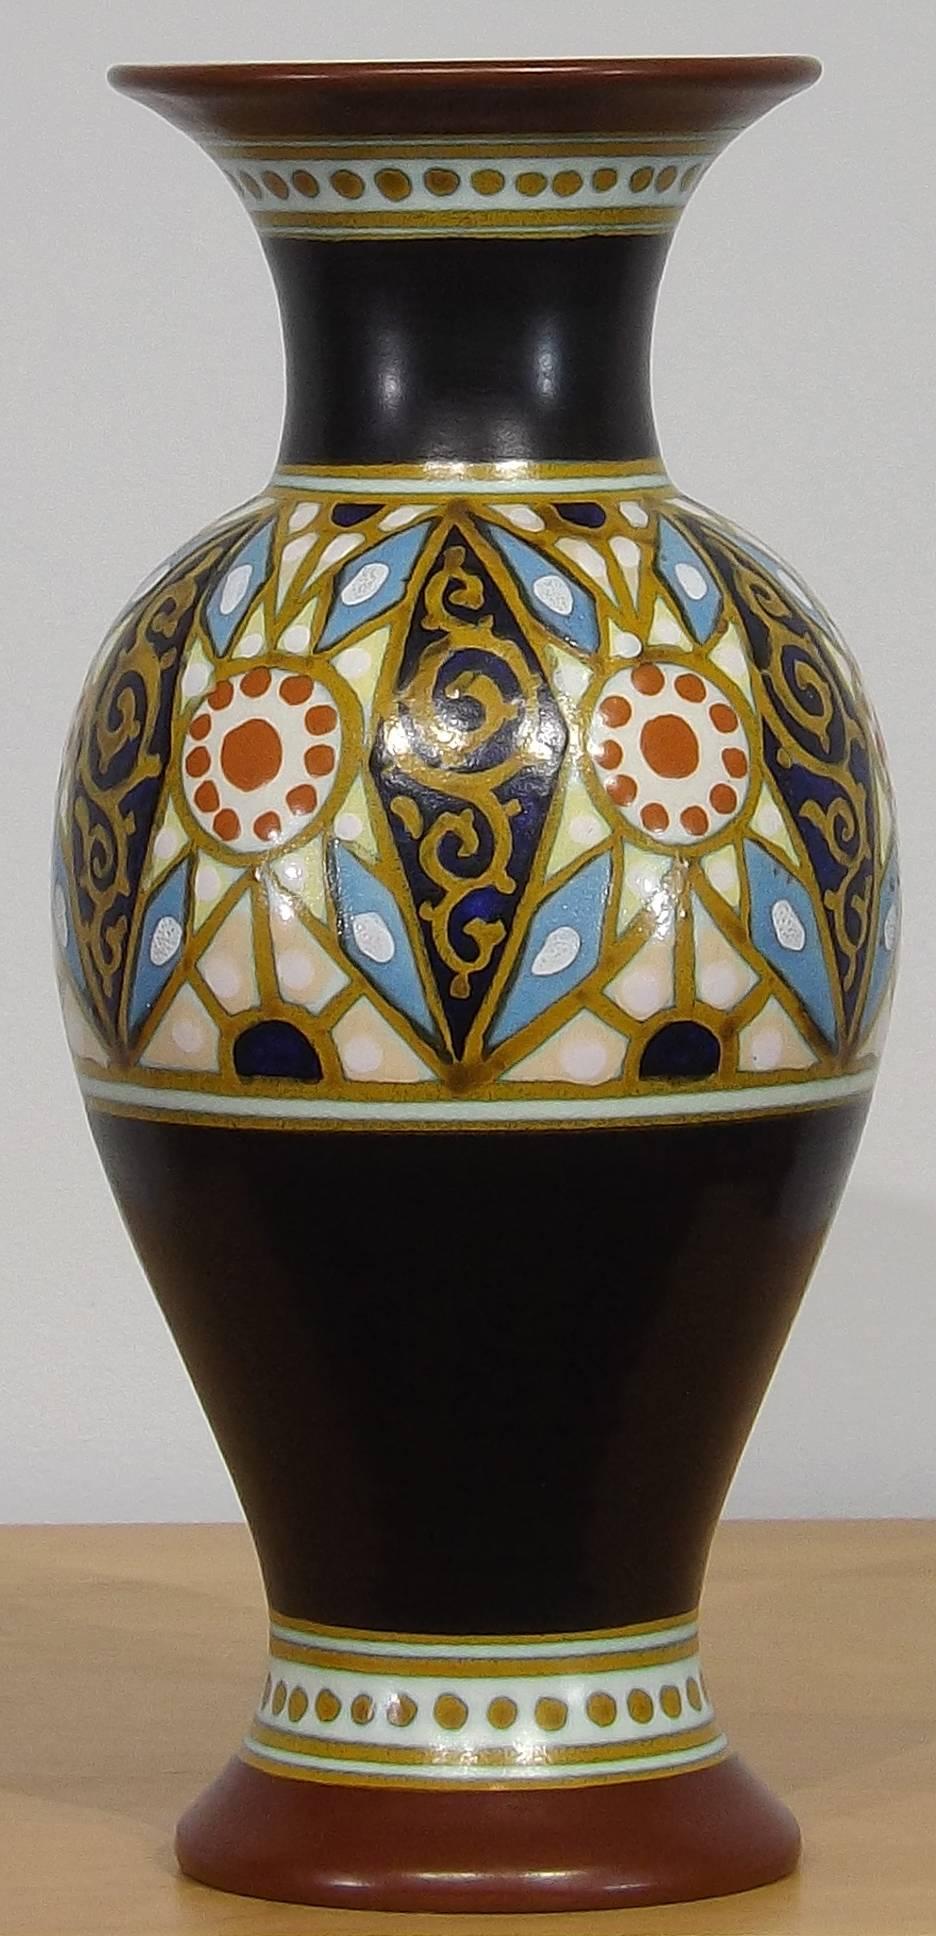 A classically styled and hand-painted Gouda vase by Plateelbakkerij Zuid-Holland, or better known as Plazuid. The Netherlands, circa 1910
